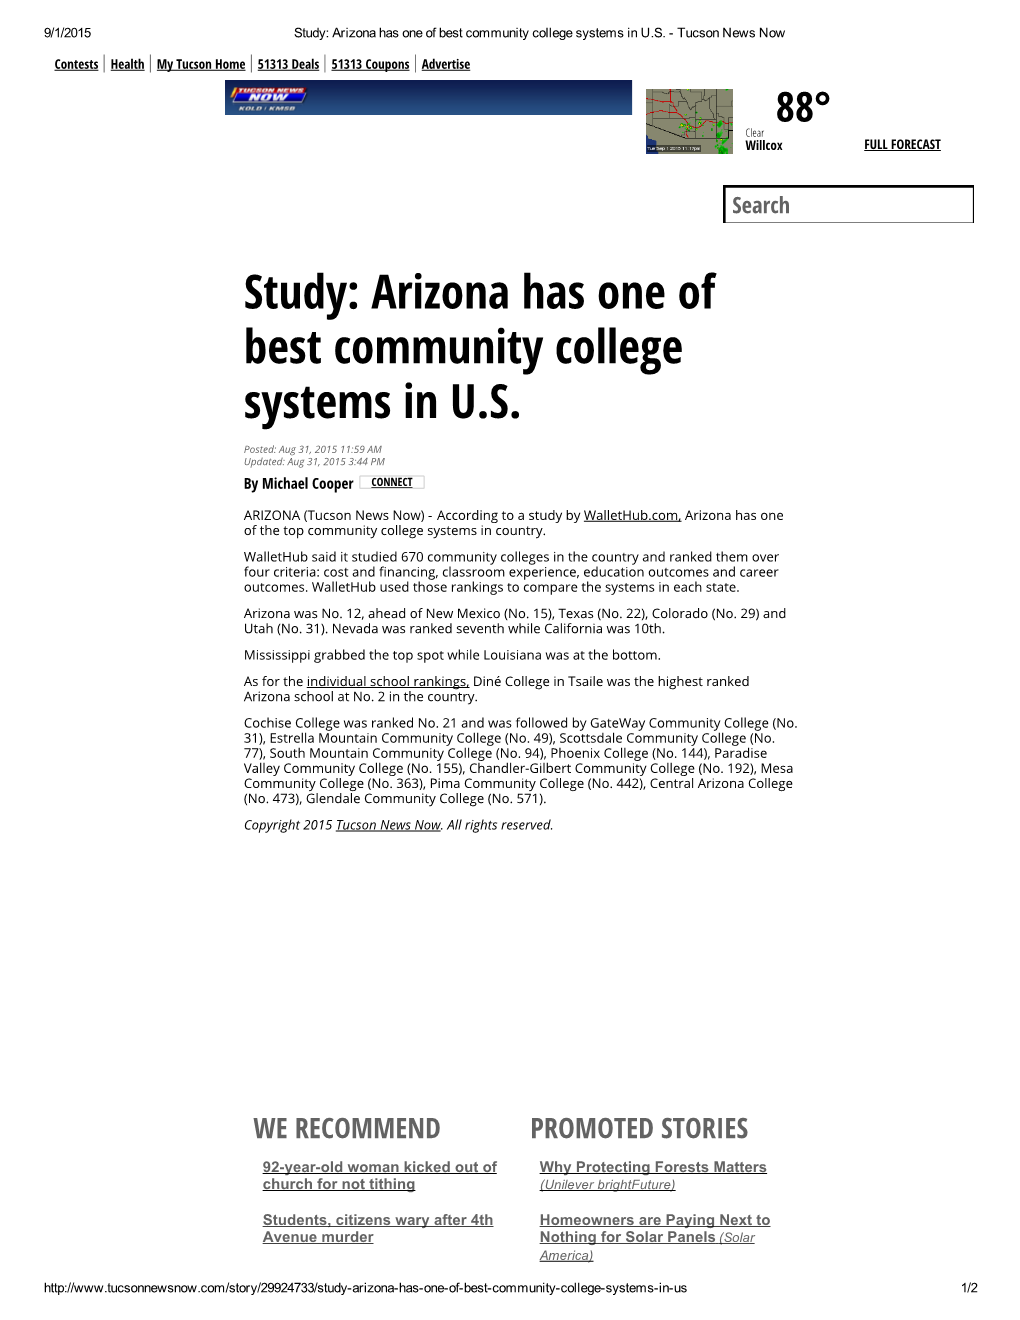 Study: Arizona Has One of Best Community College Systems in U.S. ­ Tucson News Now